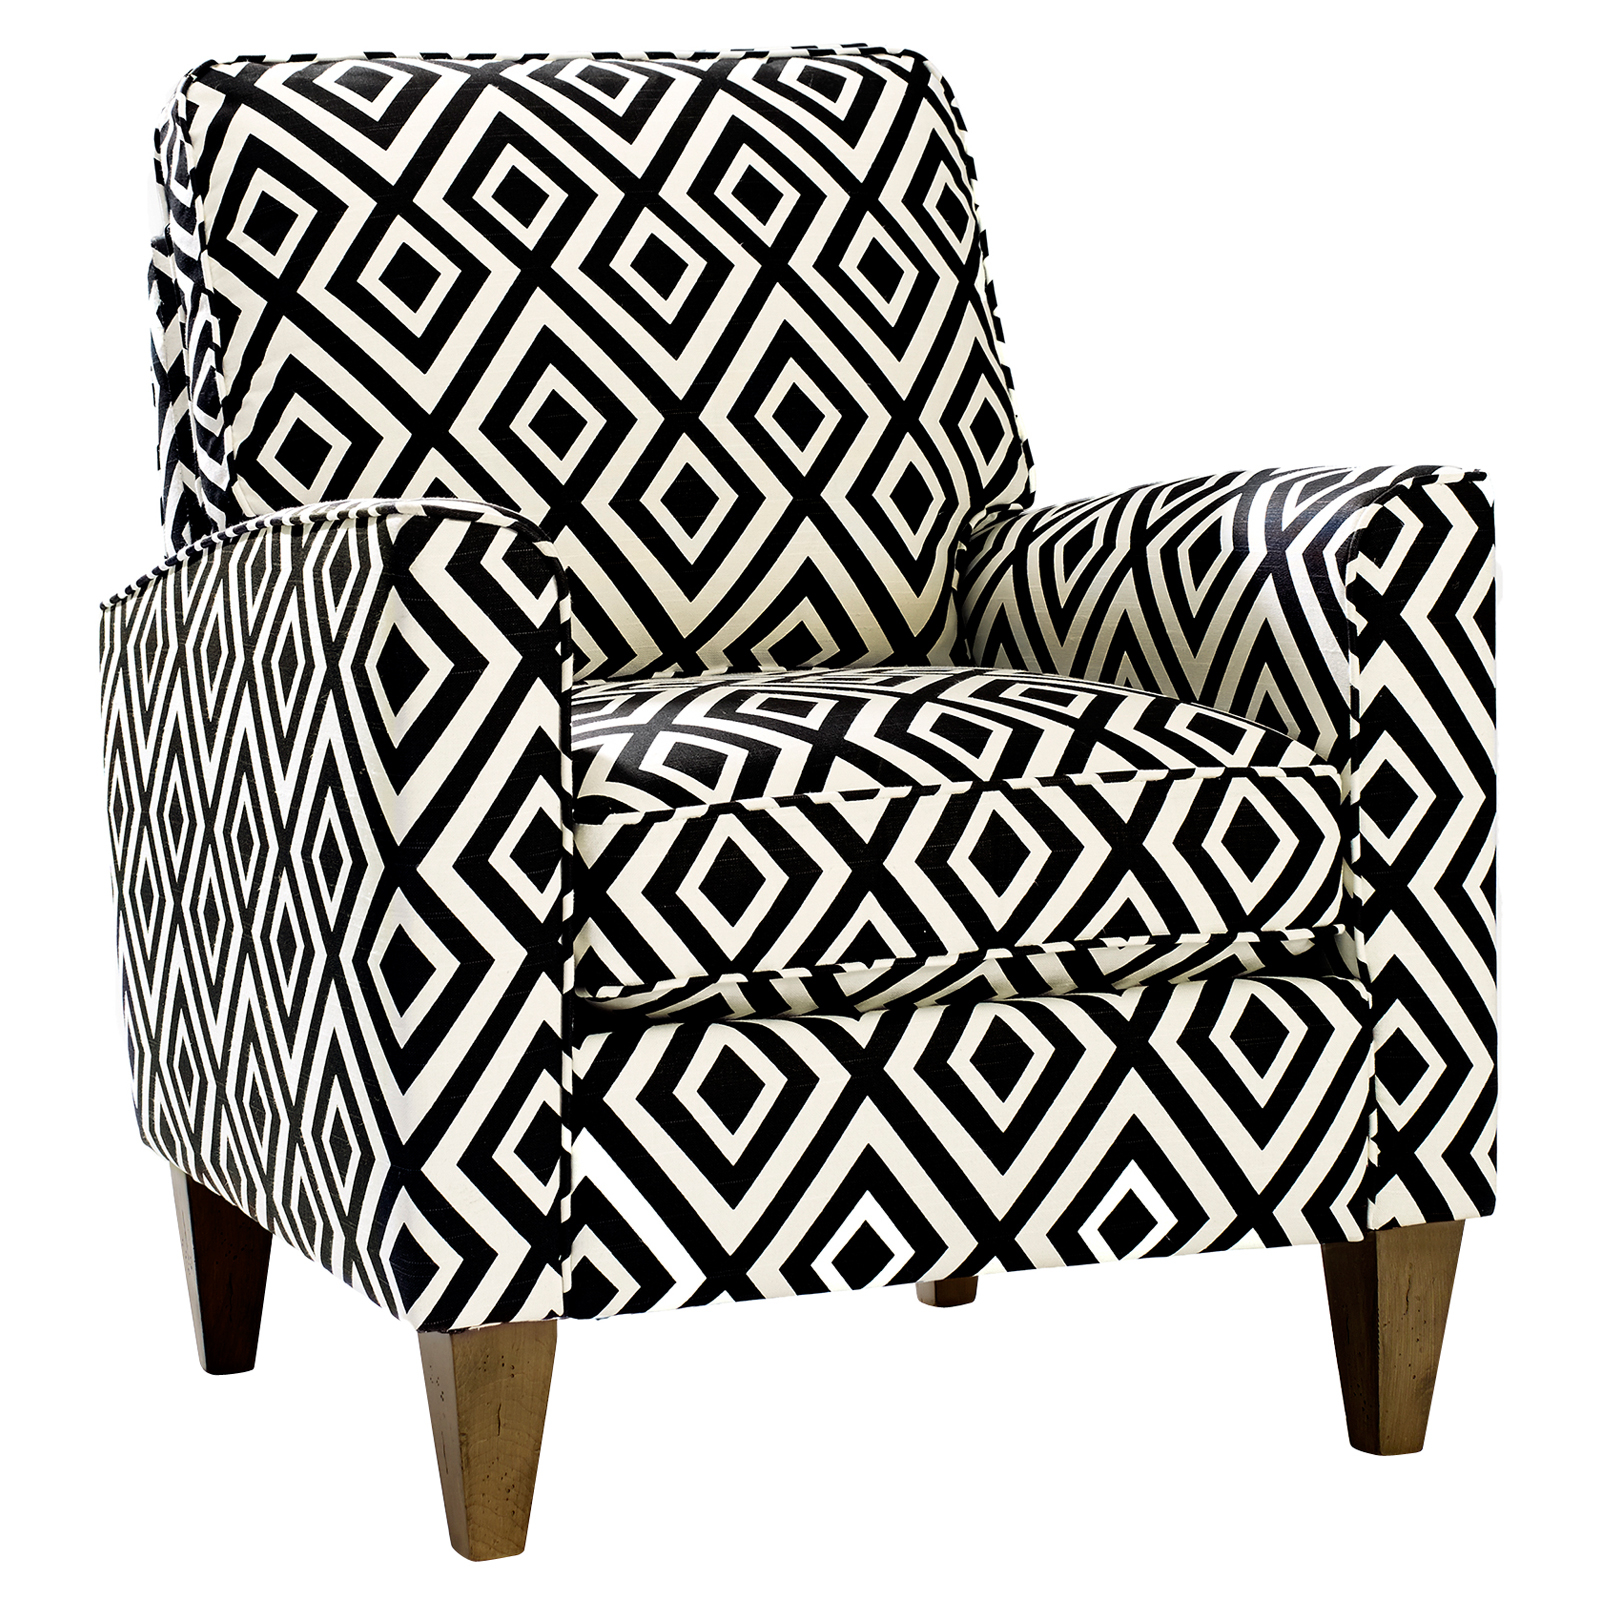 Patterned armchairs